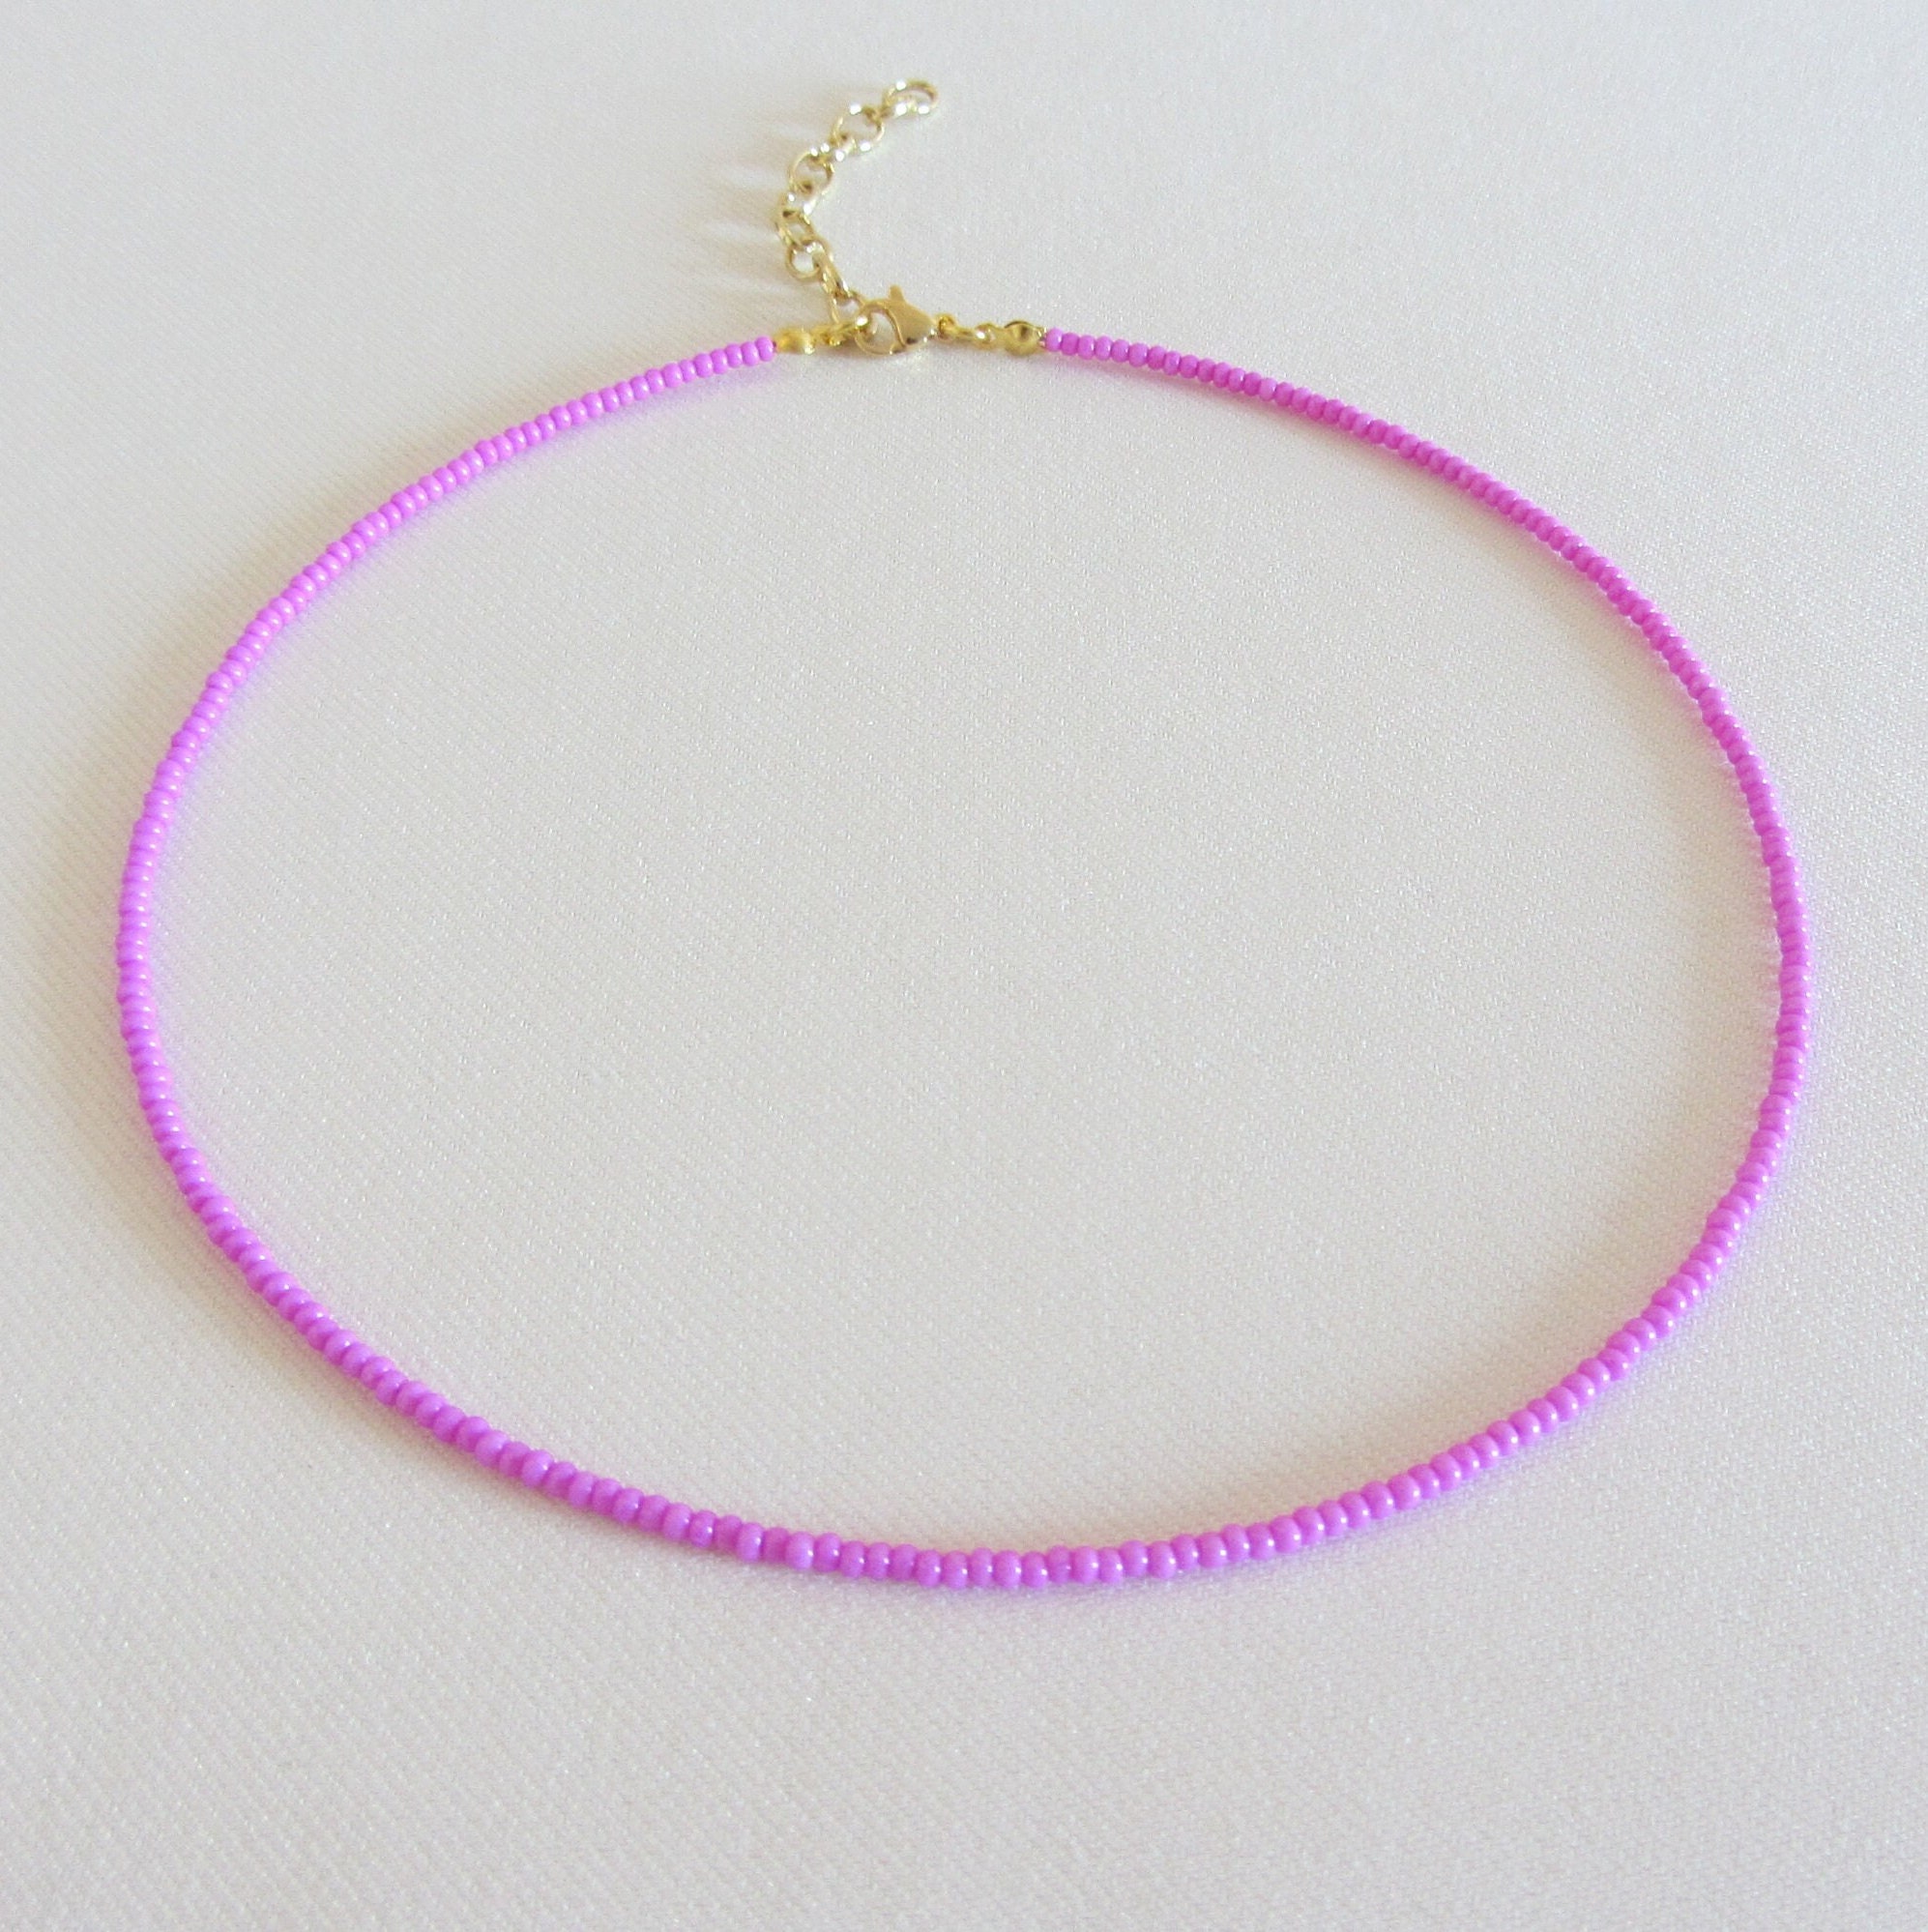 6/0 Opaque Hot Pink Seed Beads, 4mm Rocailles, 20 Grams Item